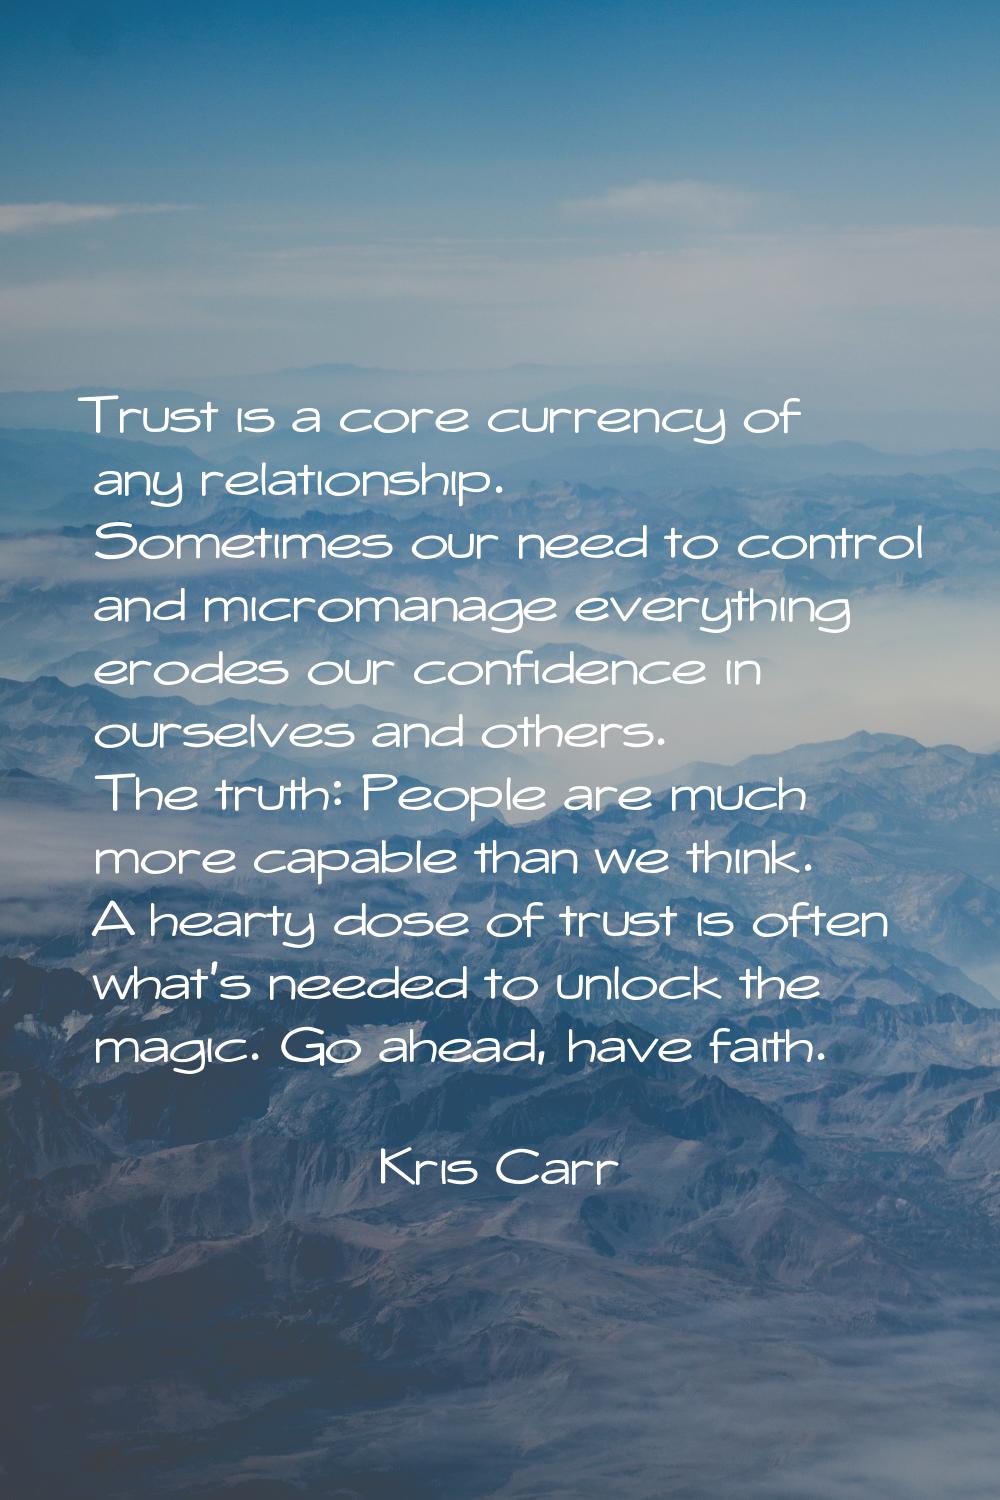 Trust is a core currency of any relationship. Sometimes our need to control and micromanage everyth